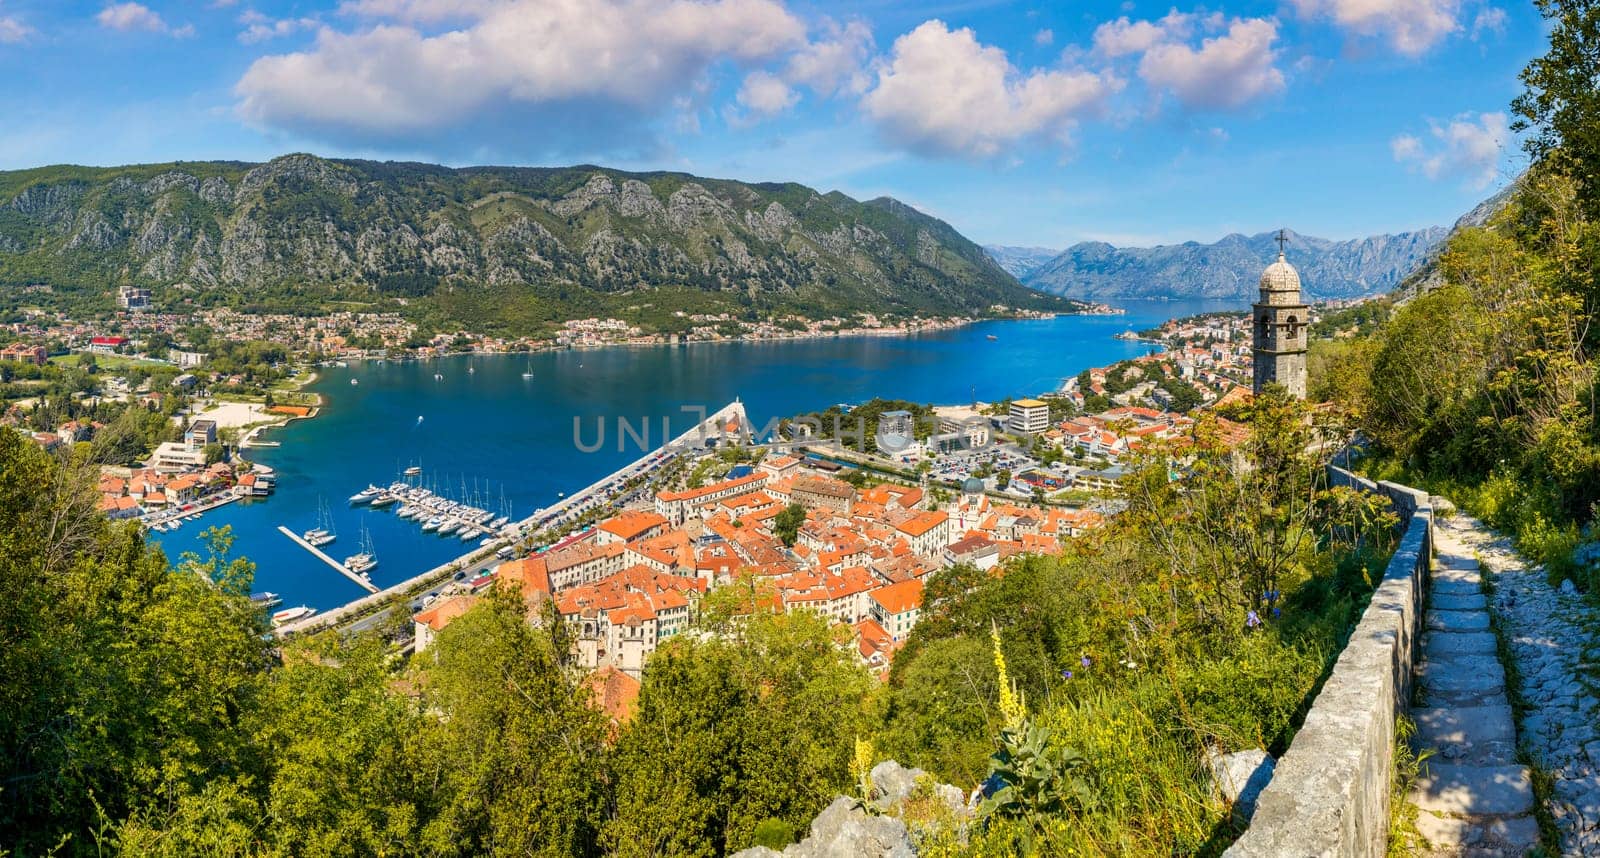 View of the old town of Kotor, Montenegro. Bay of Kotor bay is one of the most beautiful places on Adriatic Sea. Historical Kotor Old town and the Kotor bay of Adriatic sea, Montenegro. by DaLiu